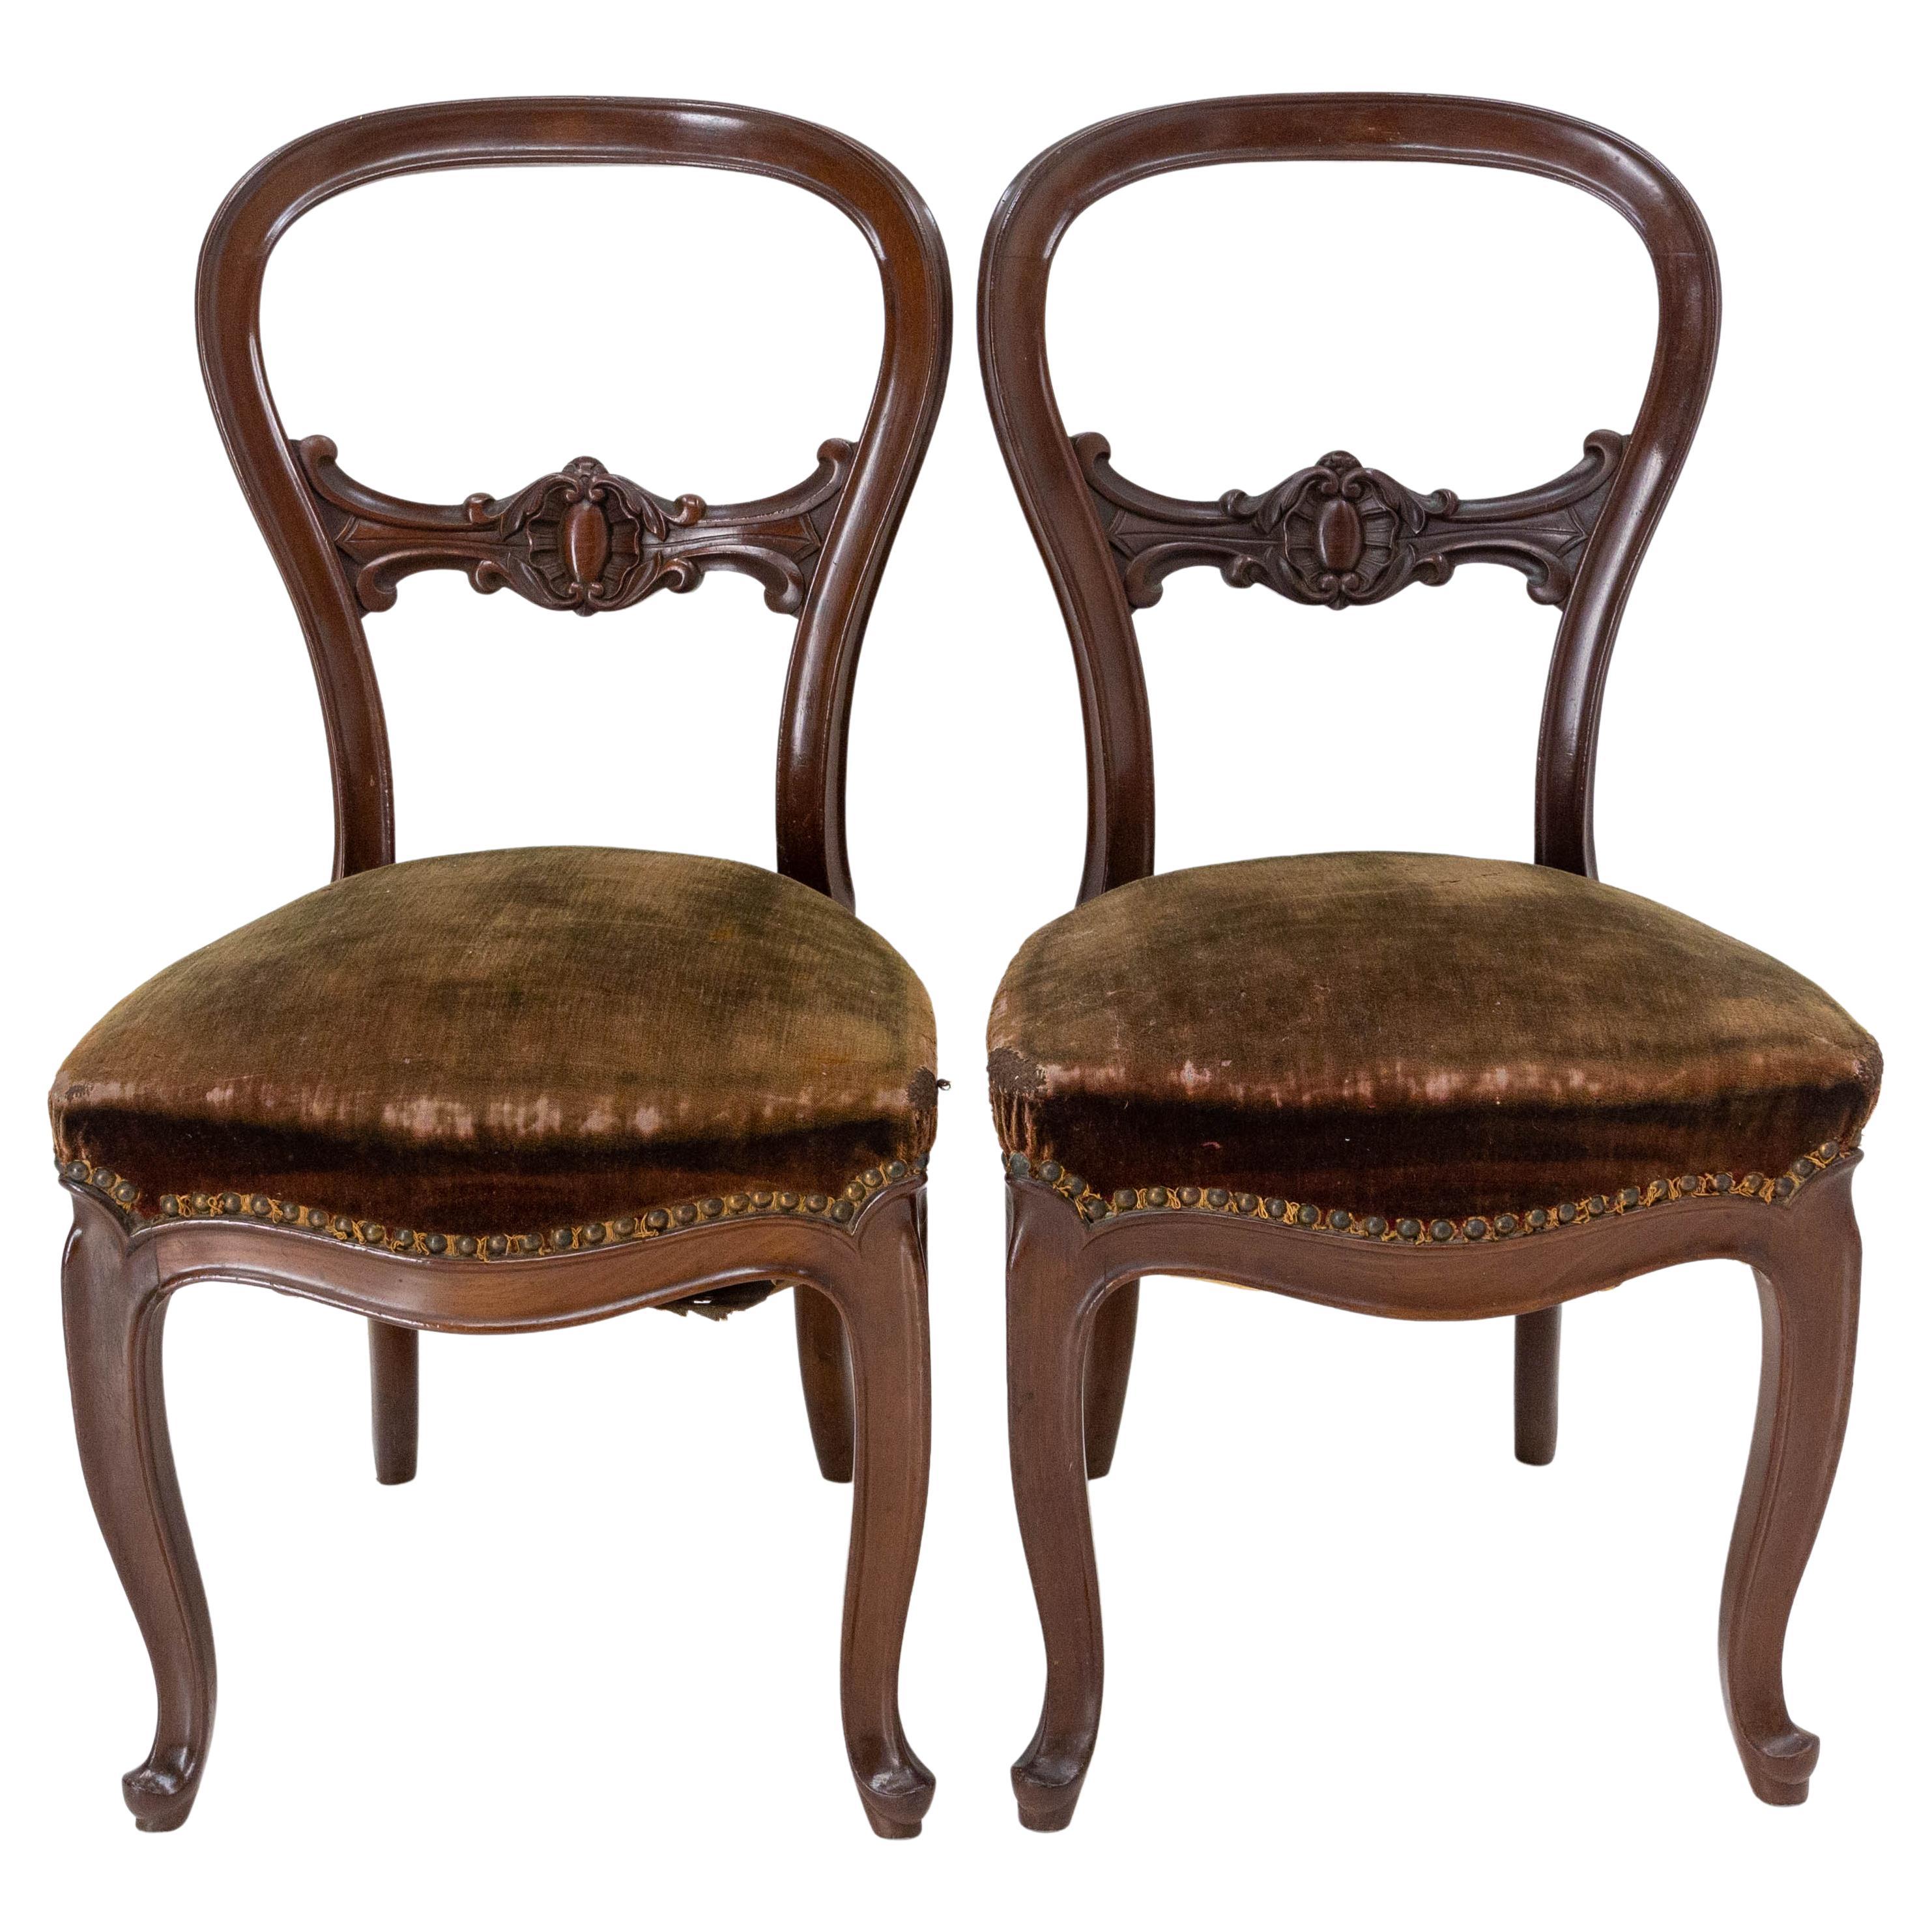 Pair of Napoleon III Exotic Wood and Velvet Chairs French, Late 19th Century For Sale